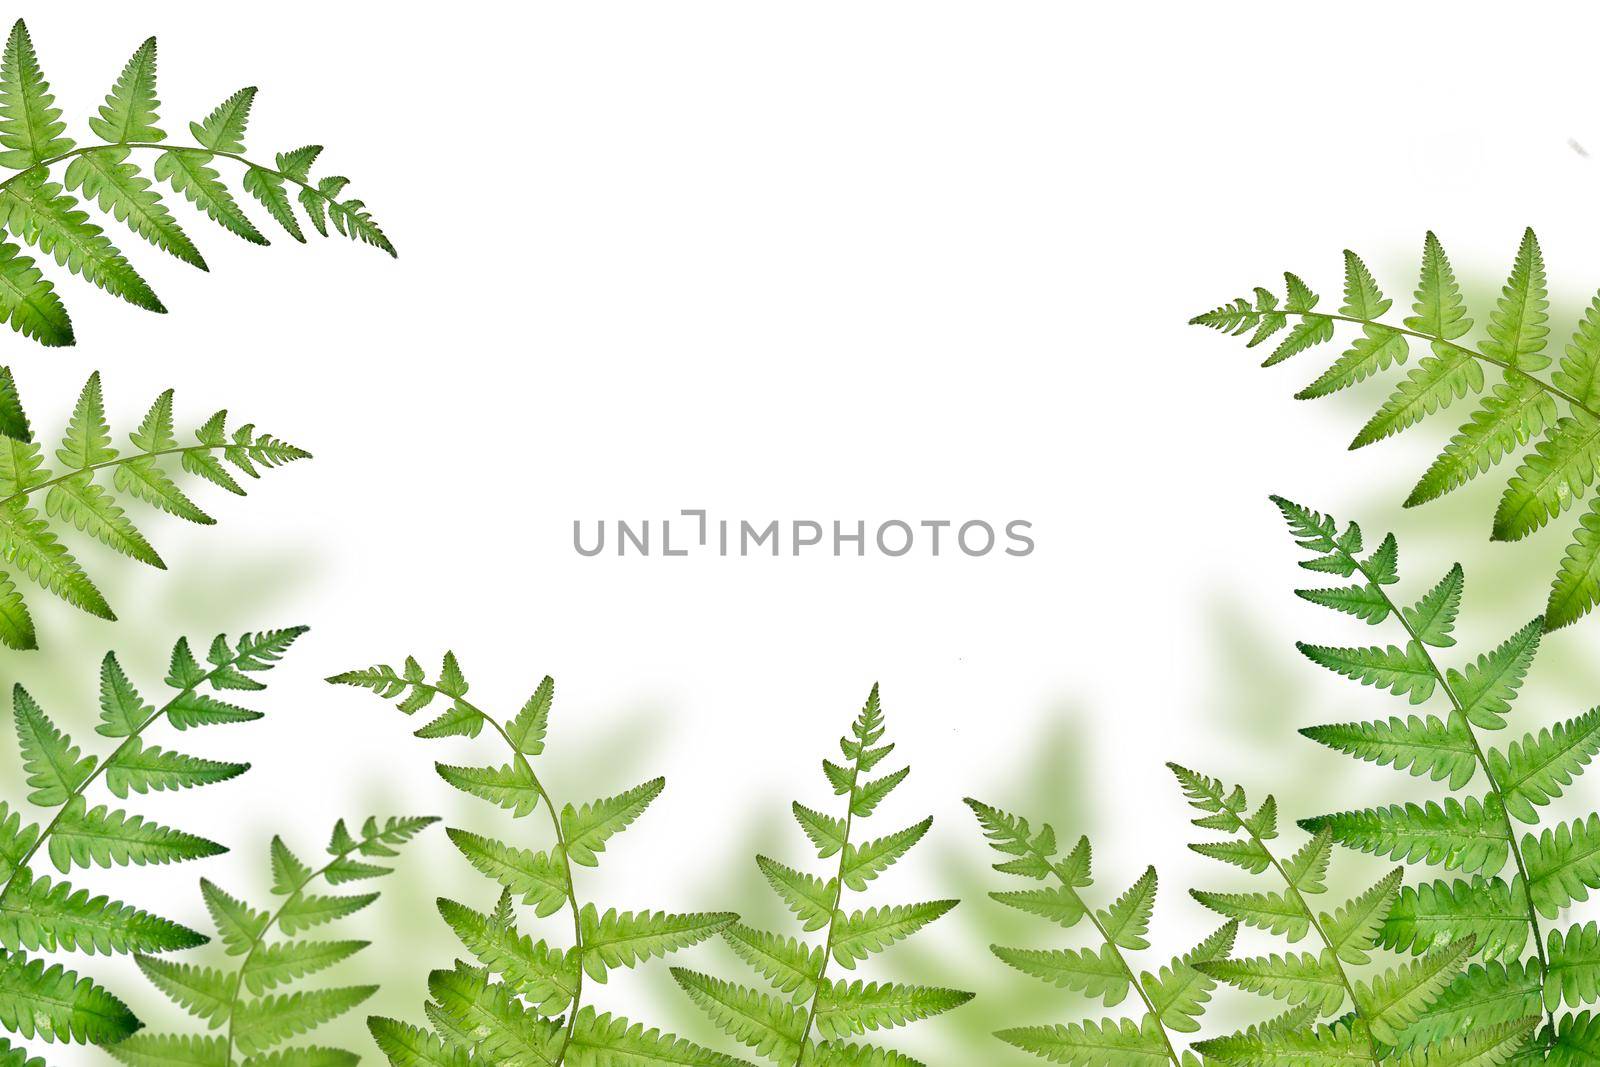 fern branches pattern isolated on white background. flat lay, top view Nature and summer concepts ideas by thanumporn